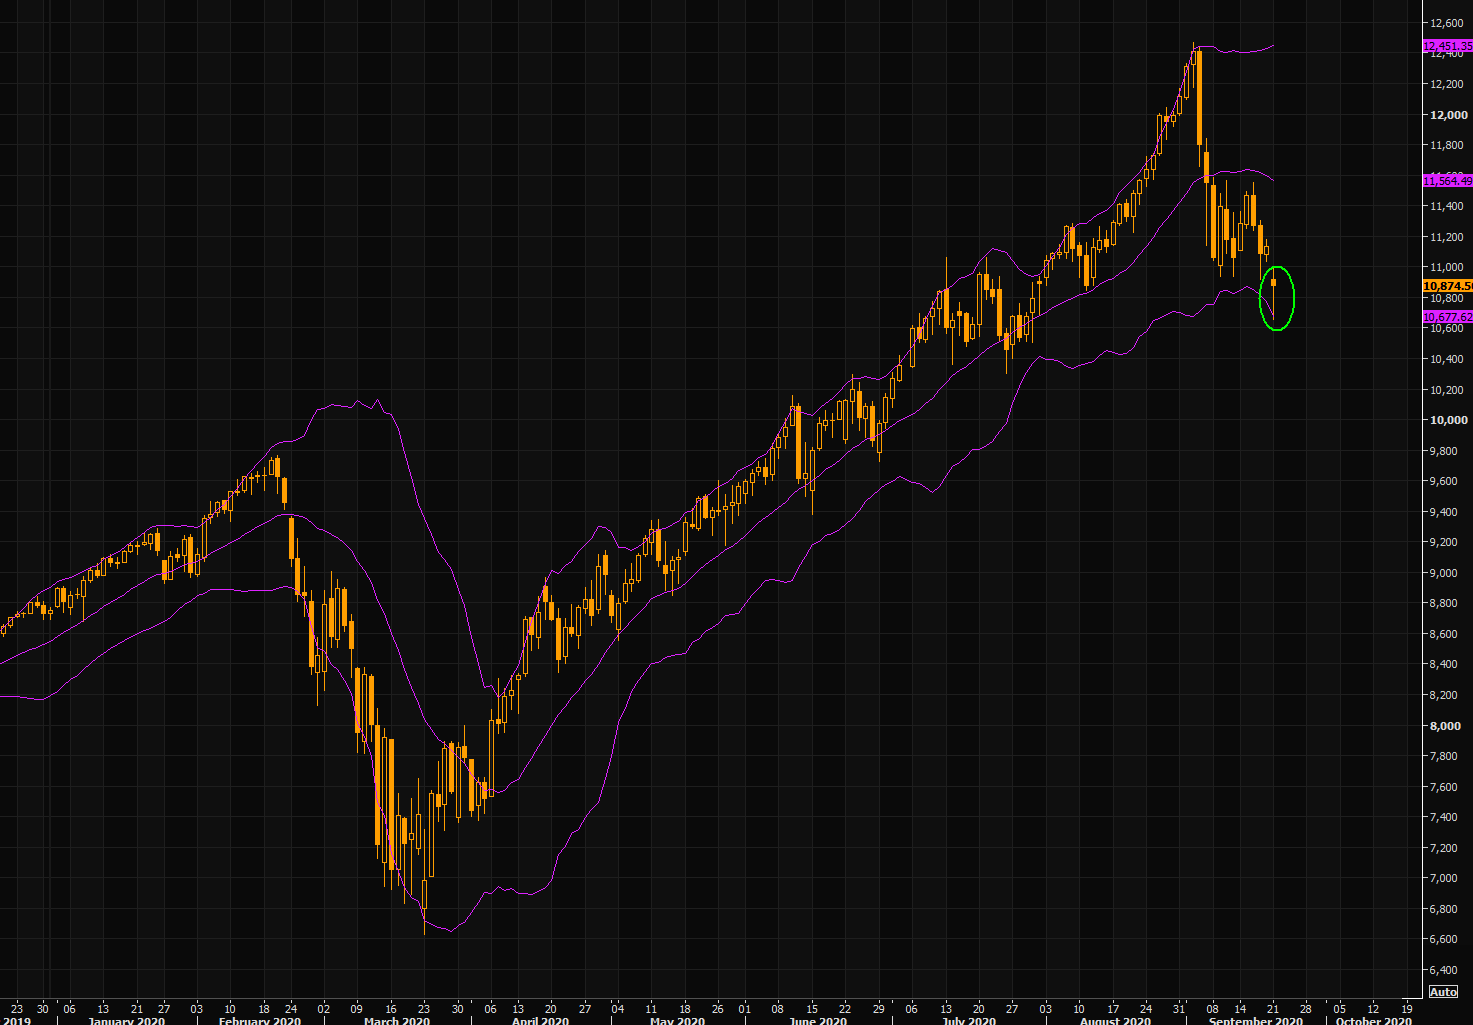 Time for some tech mean reversion (1)? - NASDAQ futs touched the lower part of the Bollinger bands